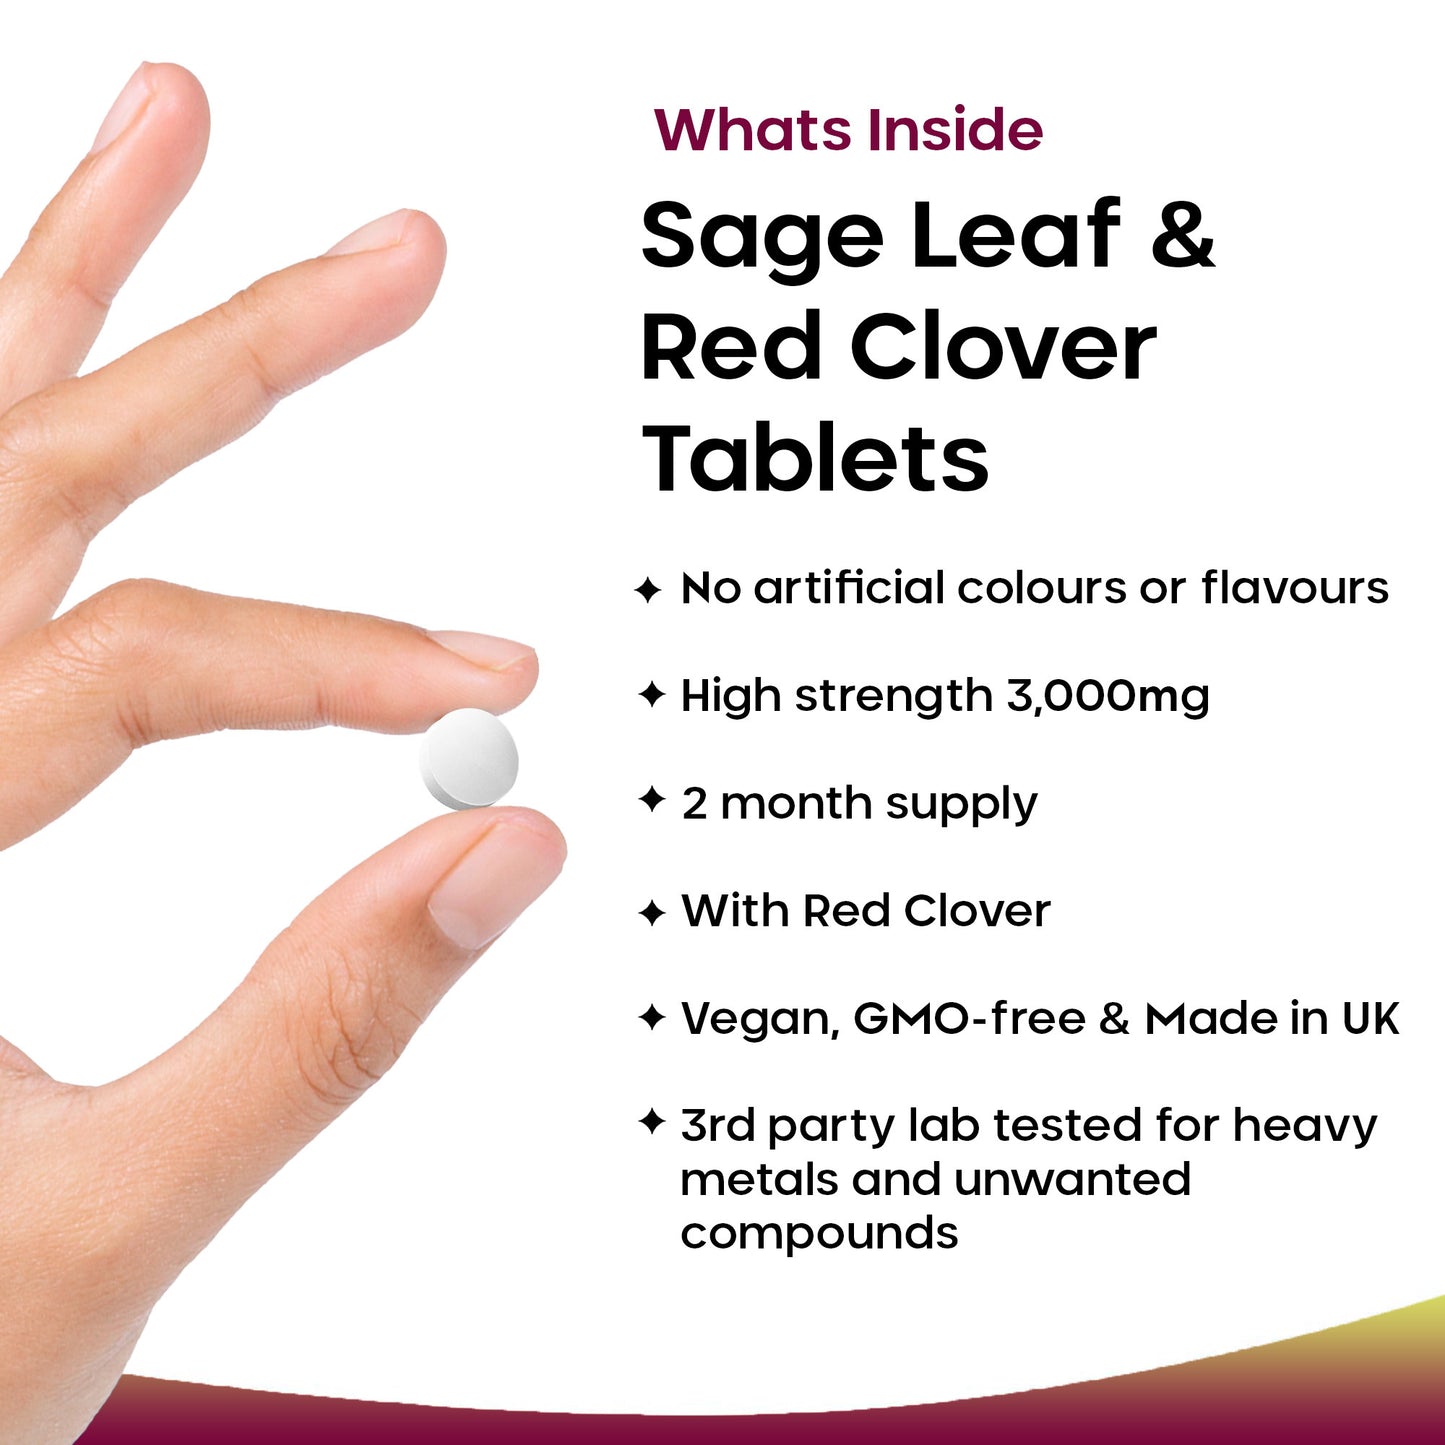 Sage Leaf & Red Clover Tablets For Menopause - 120 High Strength 3000mg Perimenopause Supplements